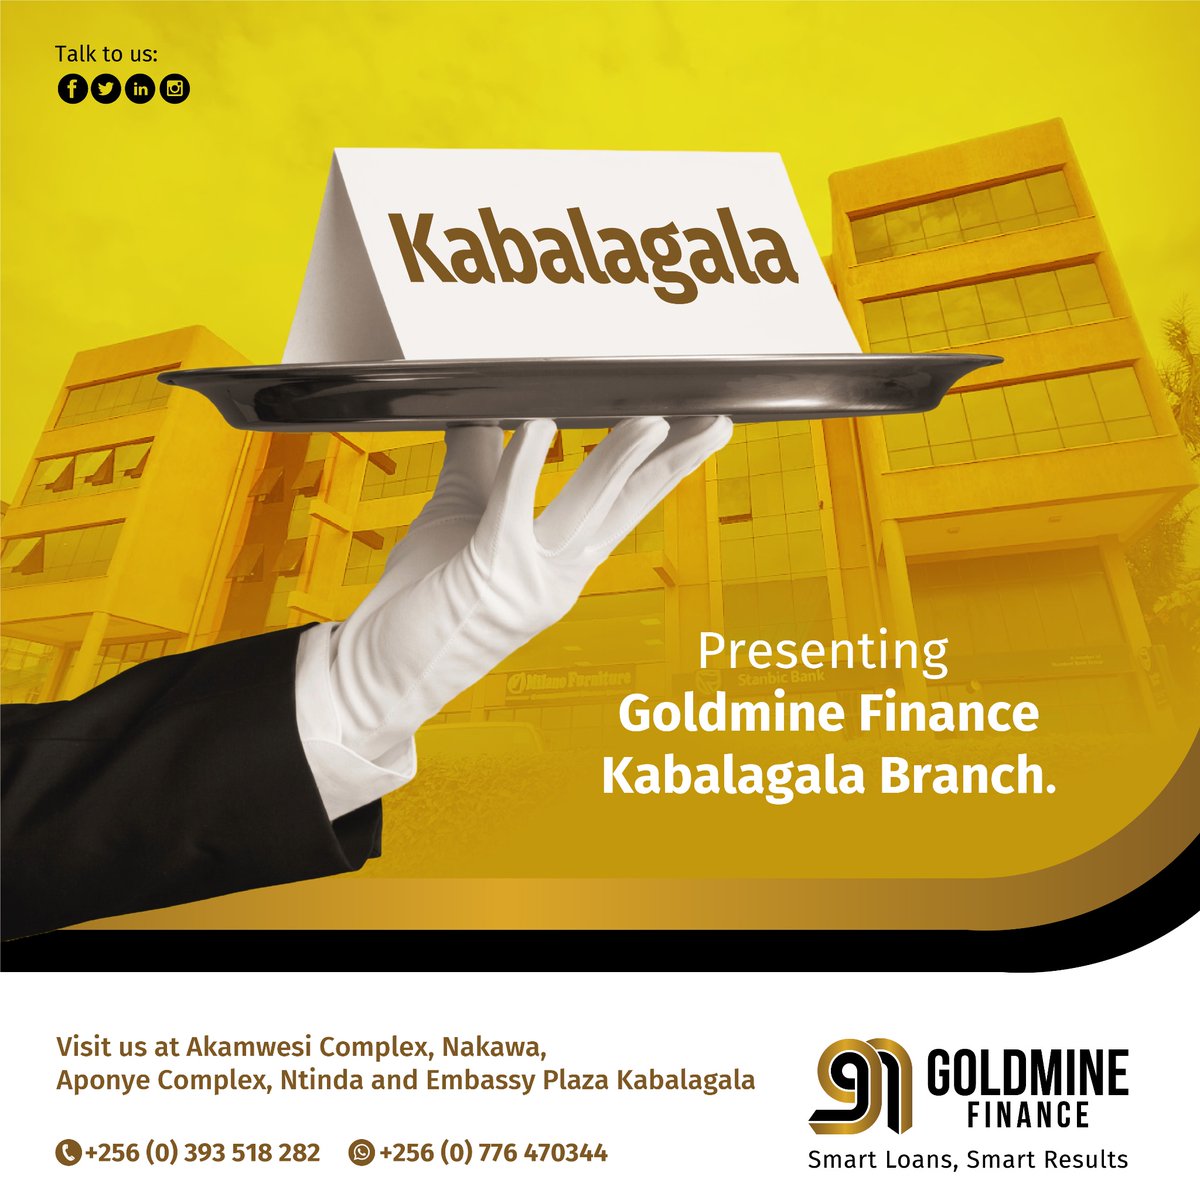 We are launching next week, stay tuned for details #Kabalagala #NewBranch #GoldmineFinance #SmartLoalsSmartResults